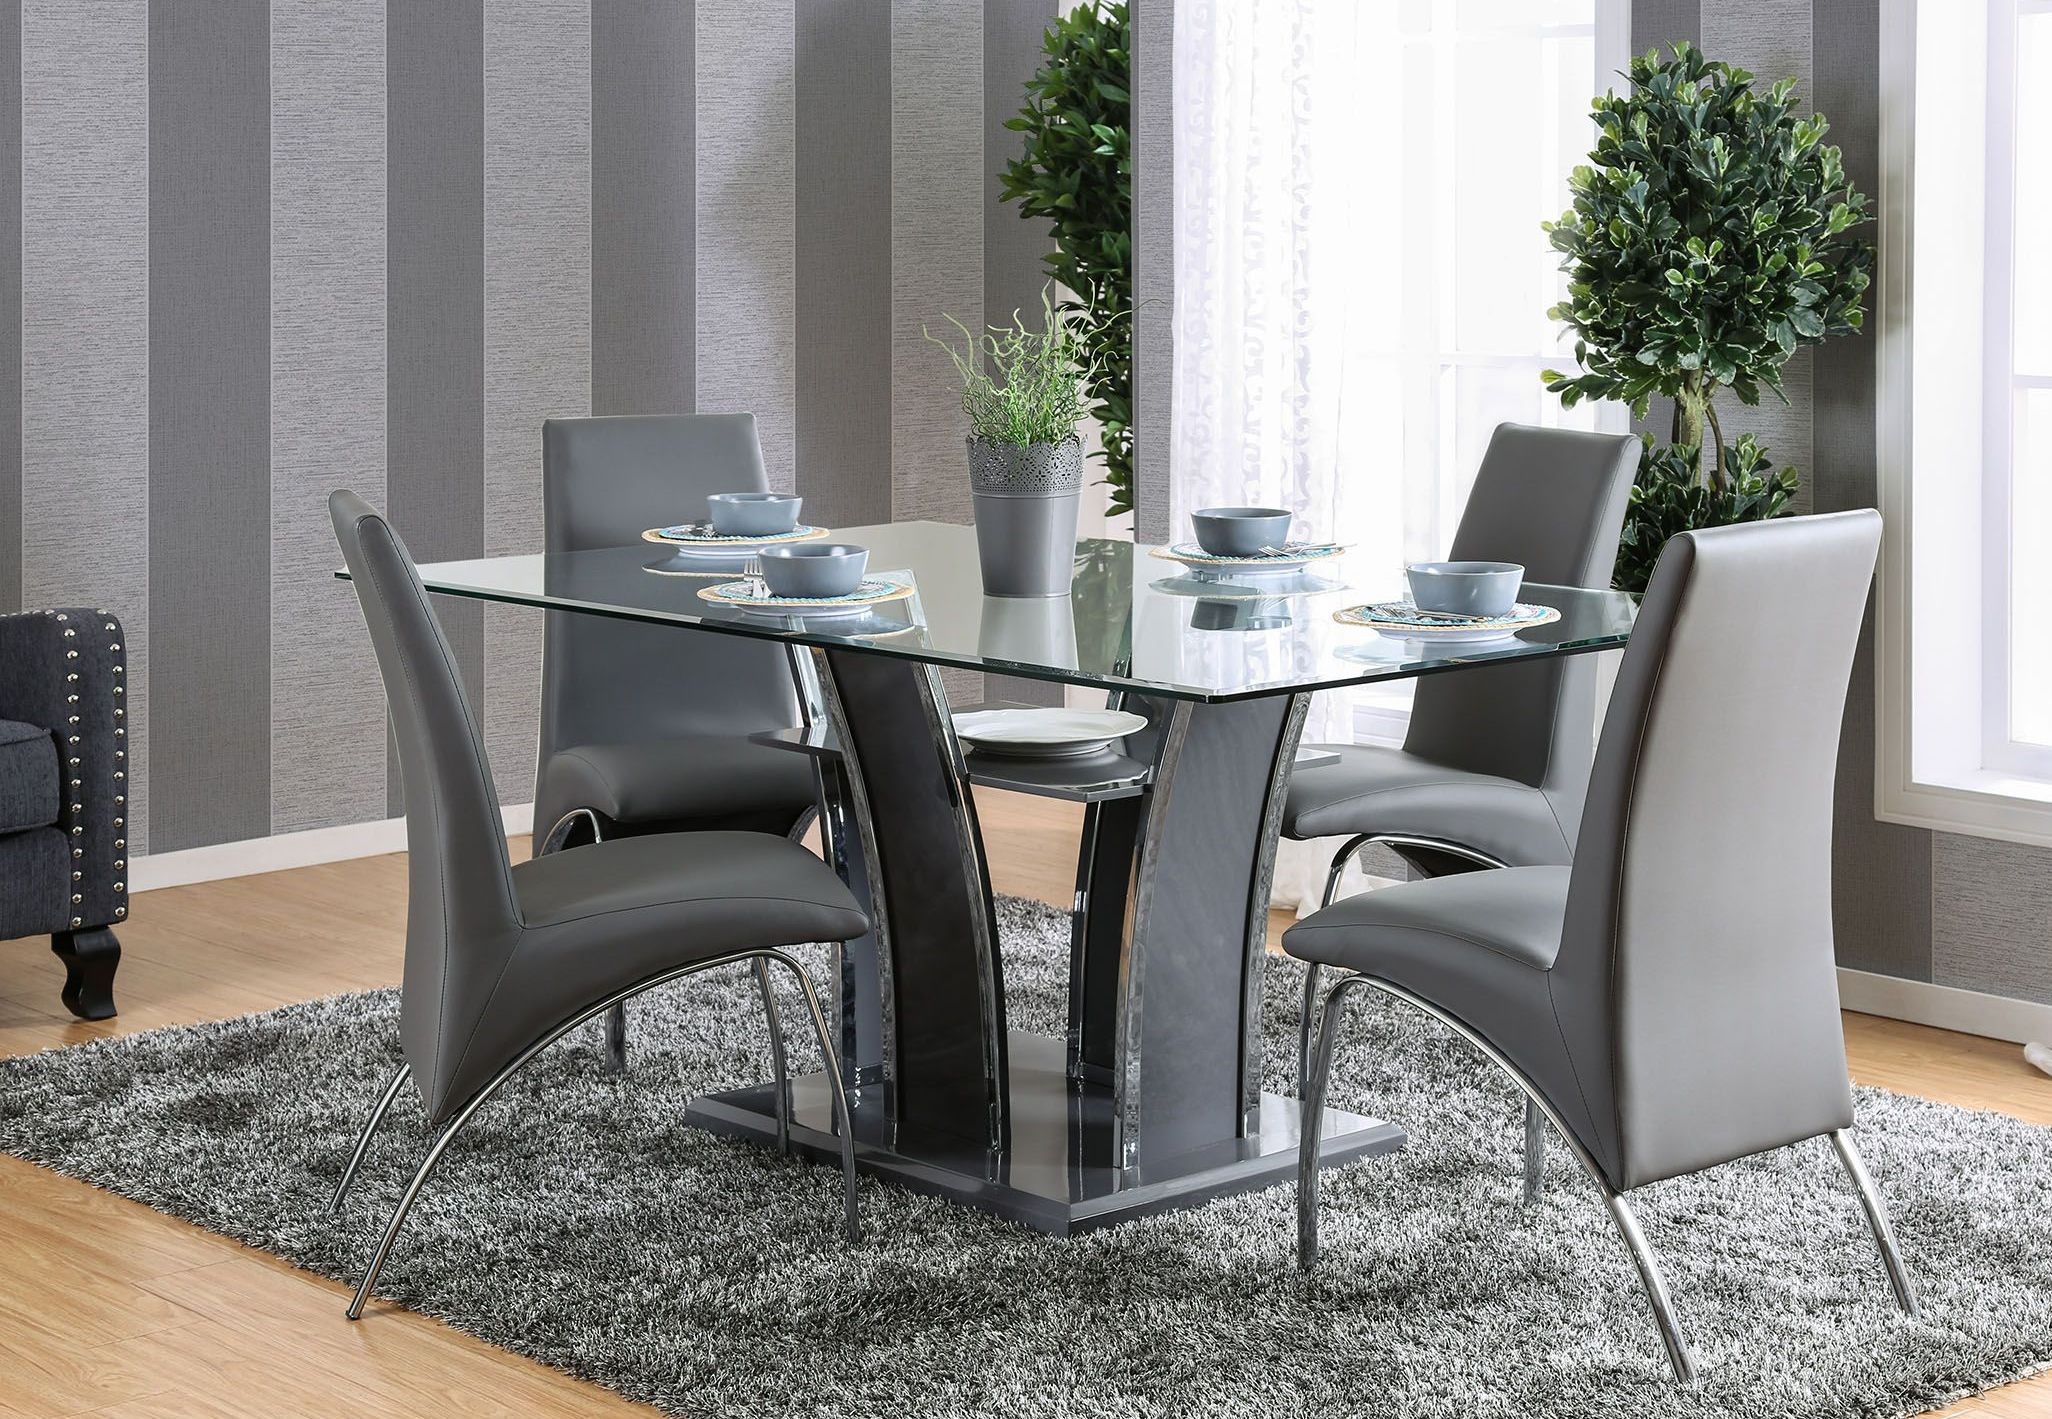 White And Gray Dining Room Table - Benjamin Moore Galveston Gray dining